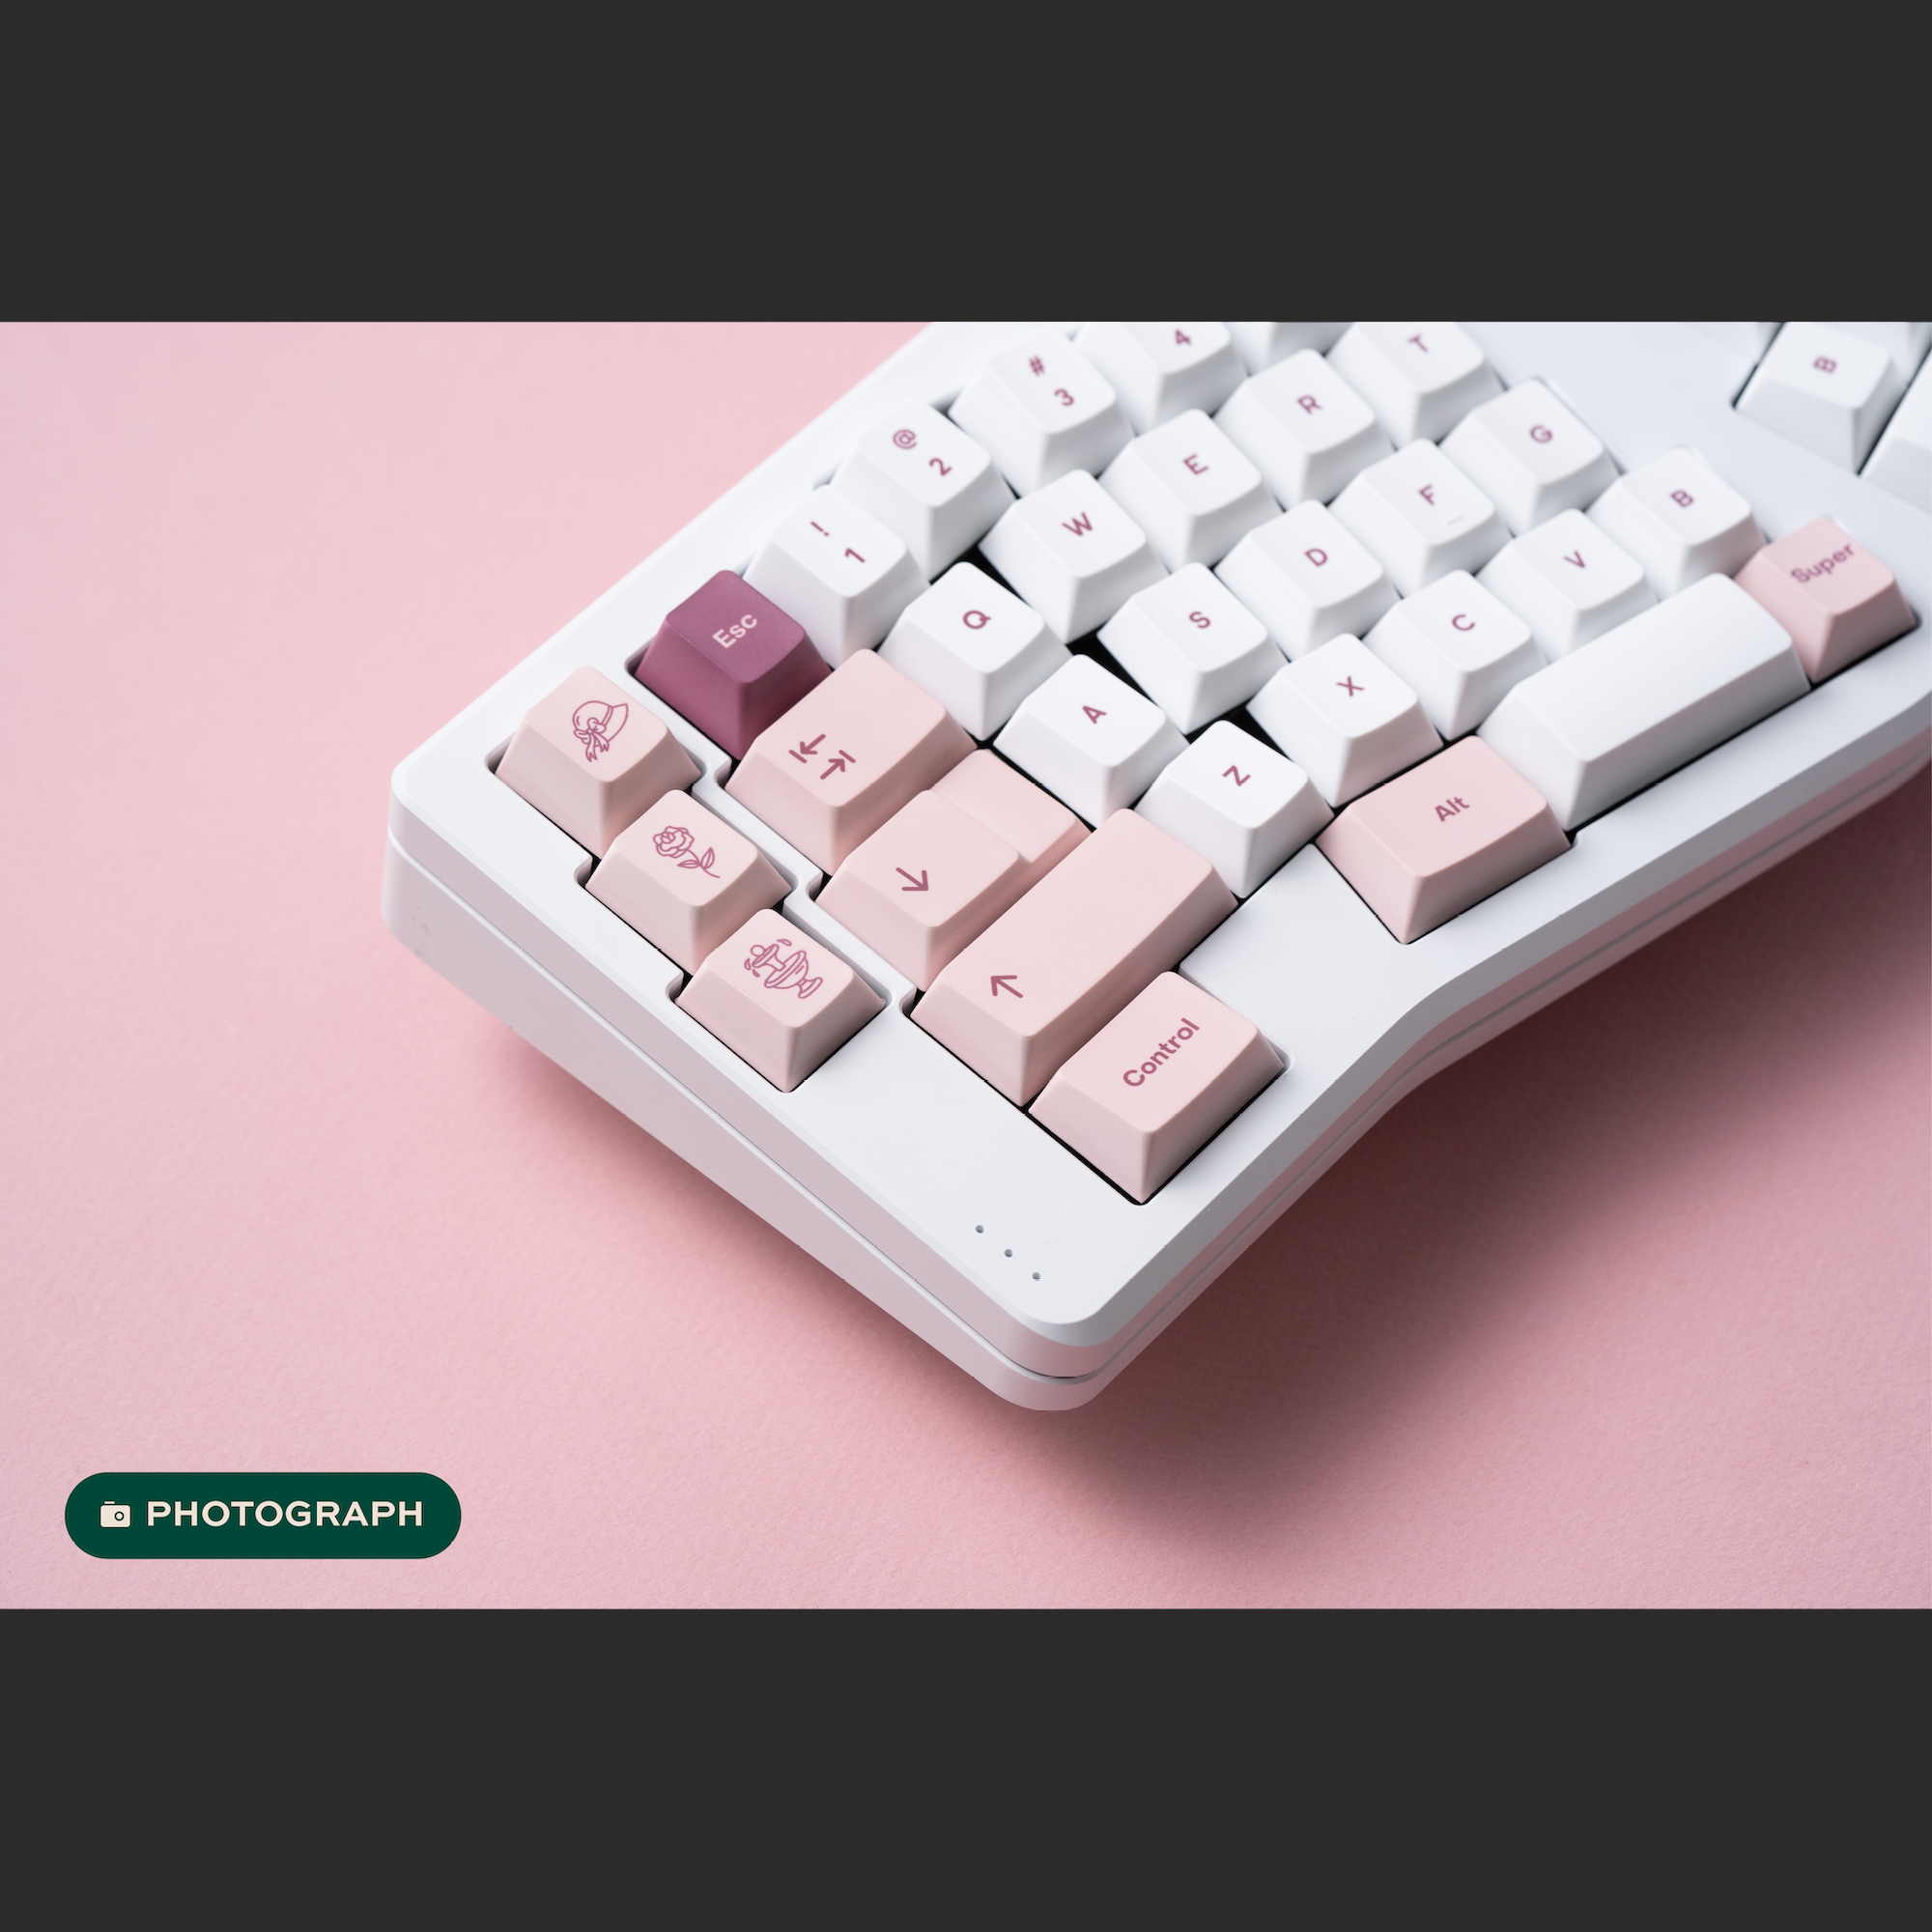 Rosewater Keycaps